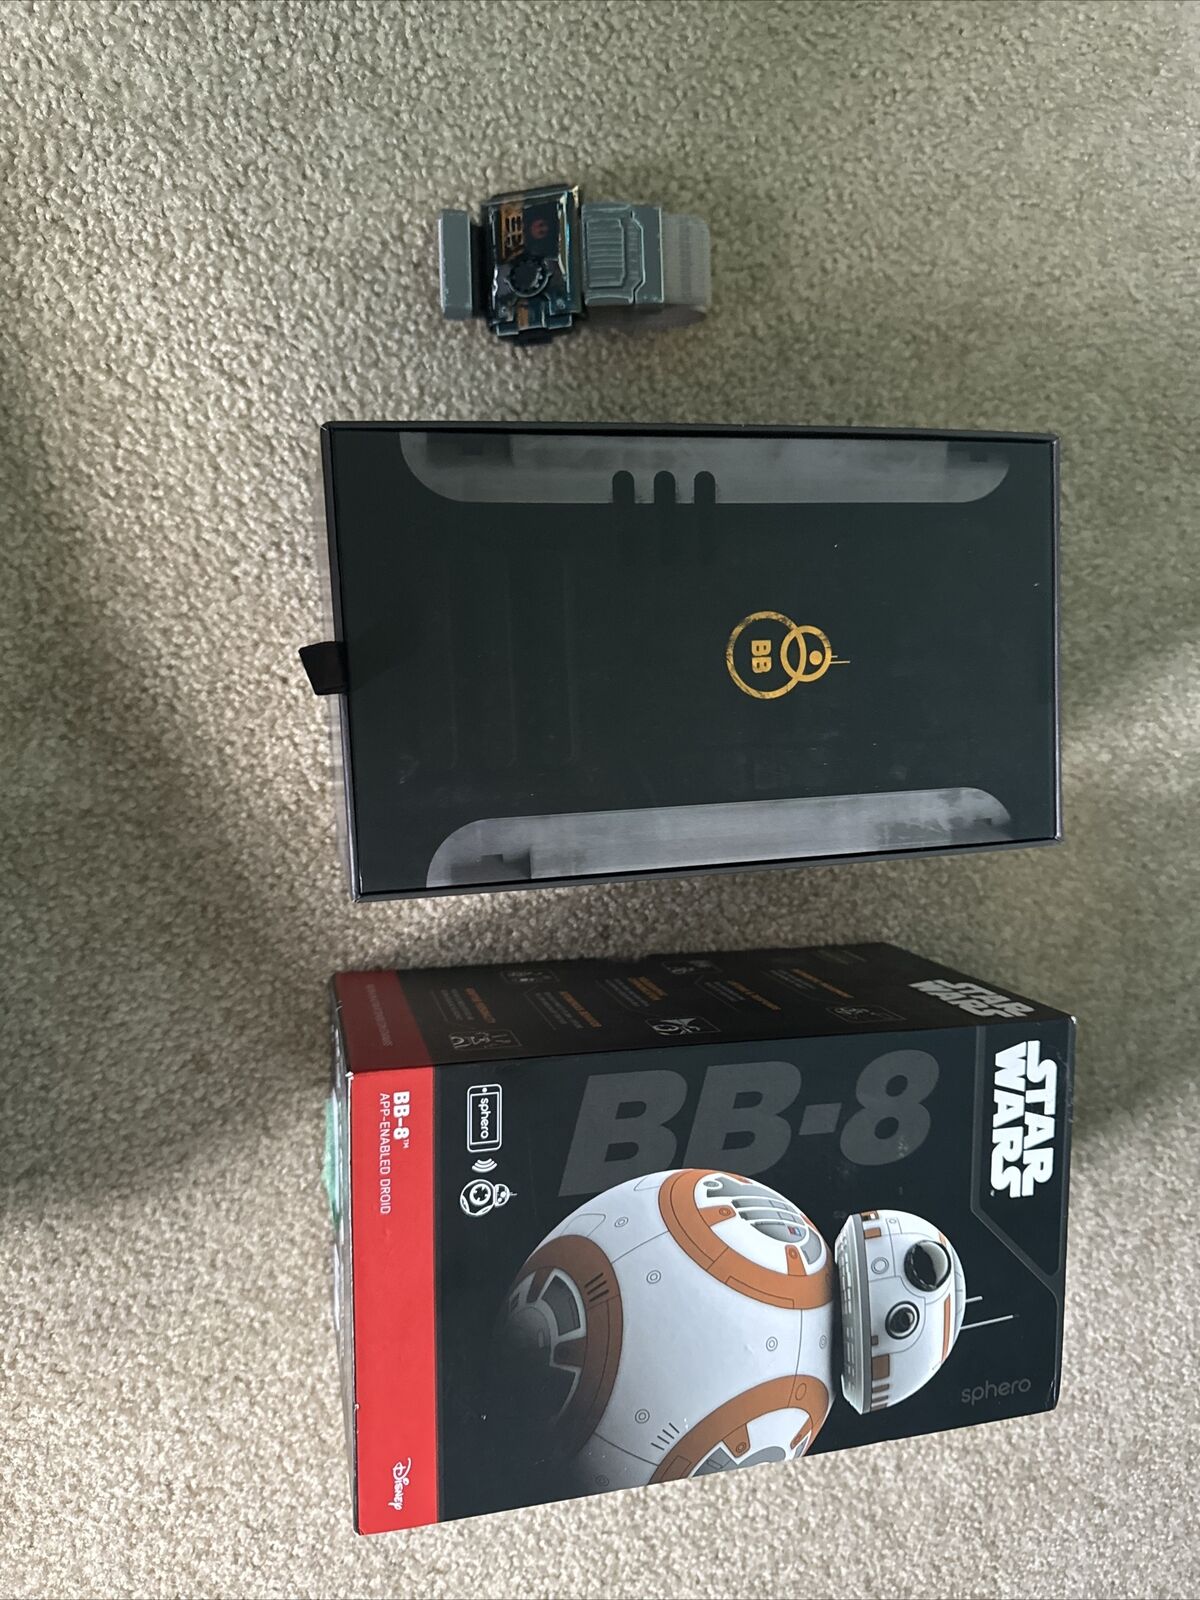 Disney BB8 Sphero - Bot - Pad - Cable + A Force Band